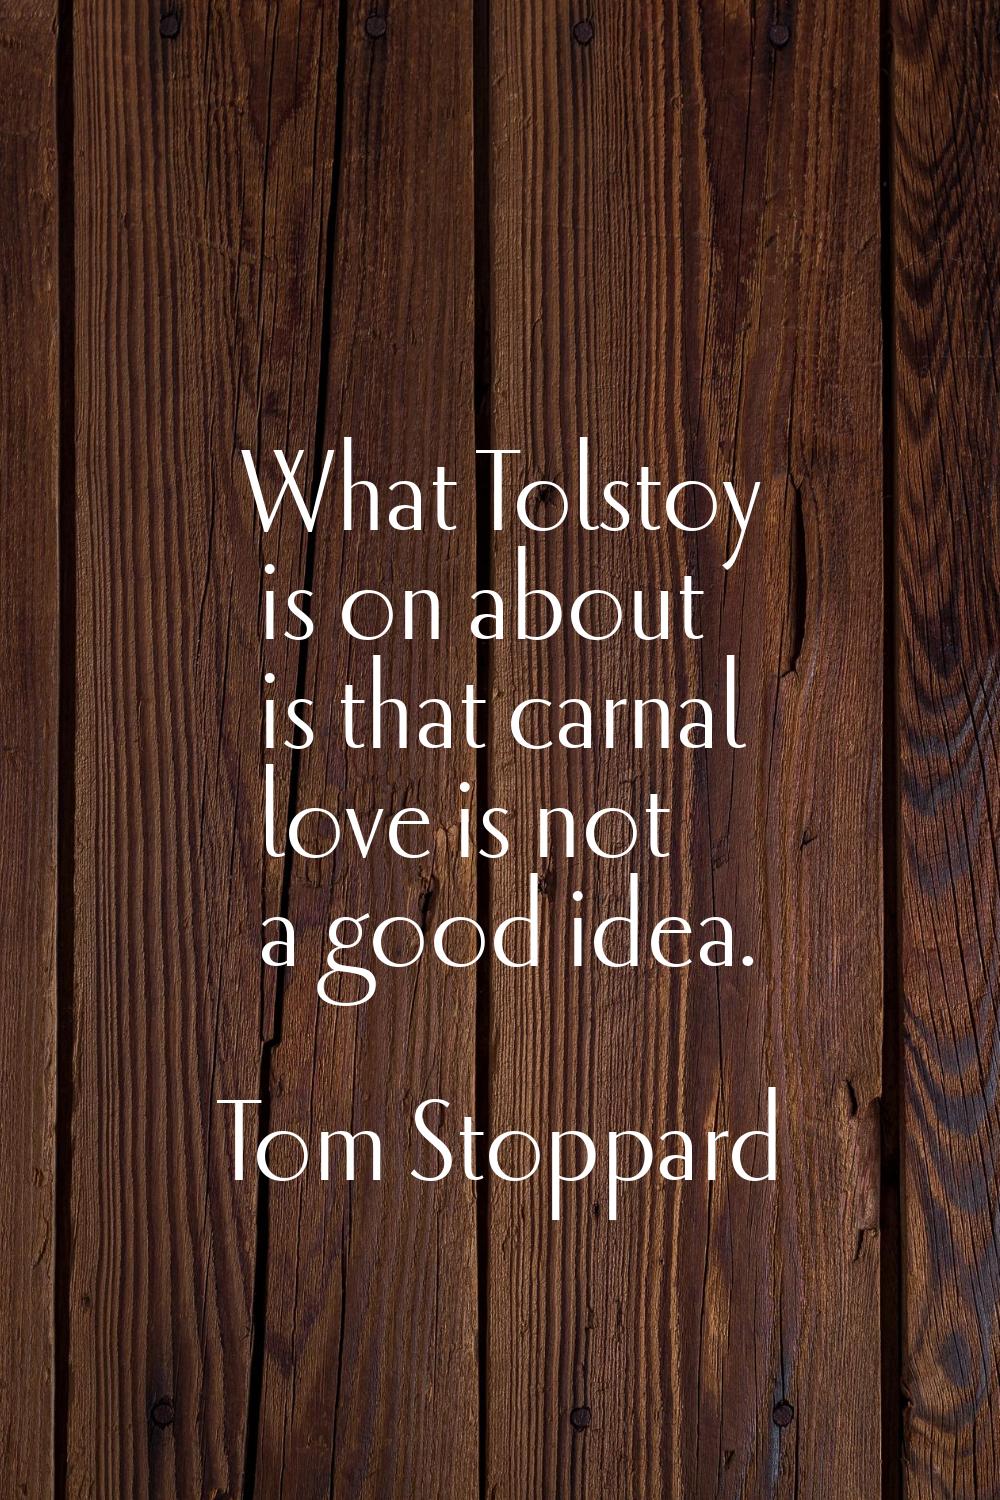 What Tolstoy is on about is that carnal love is not a good idea.